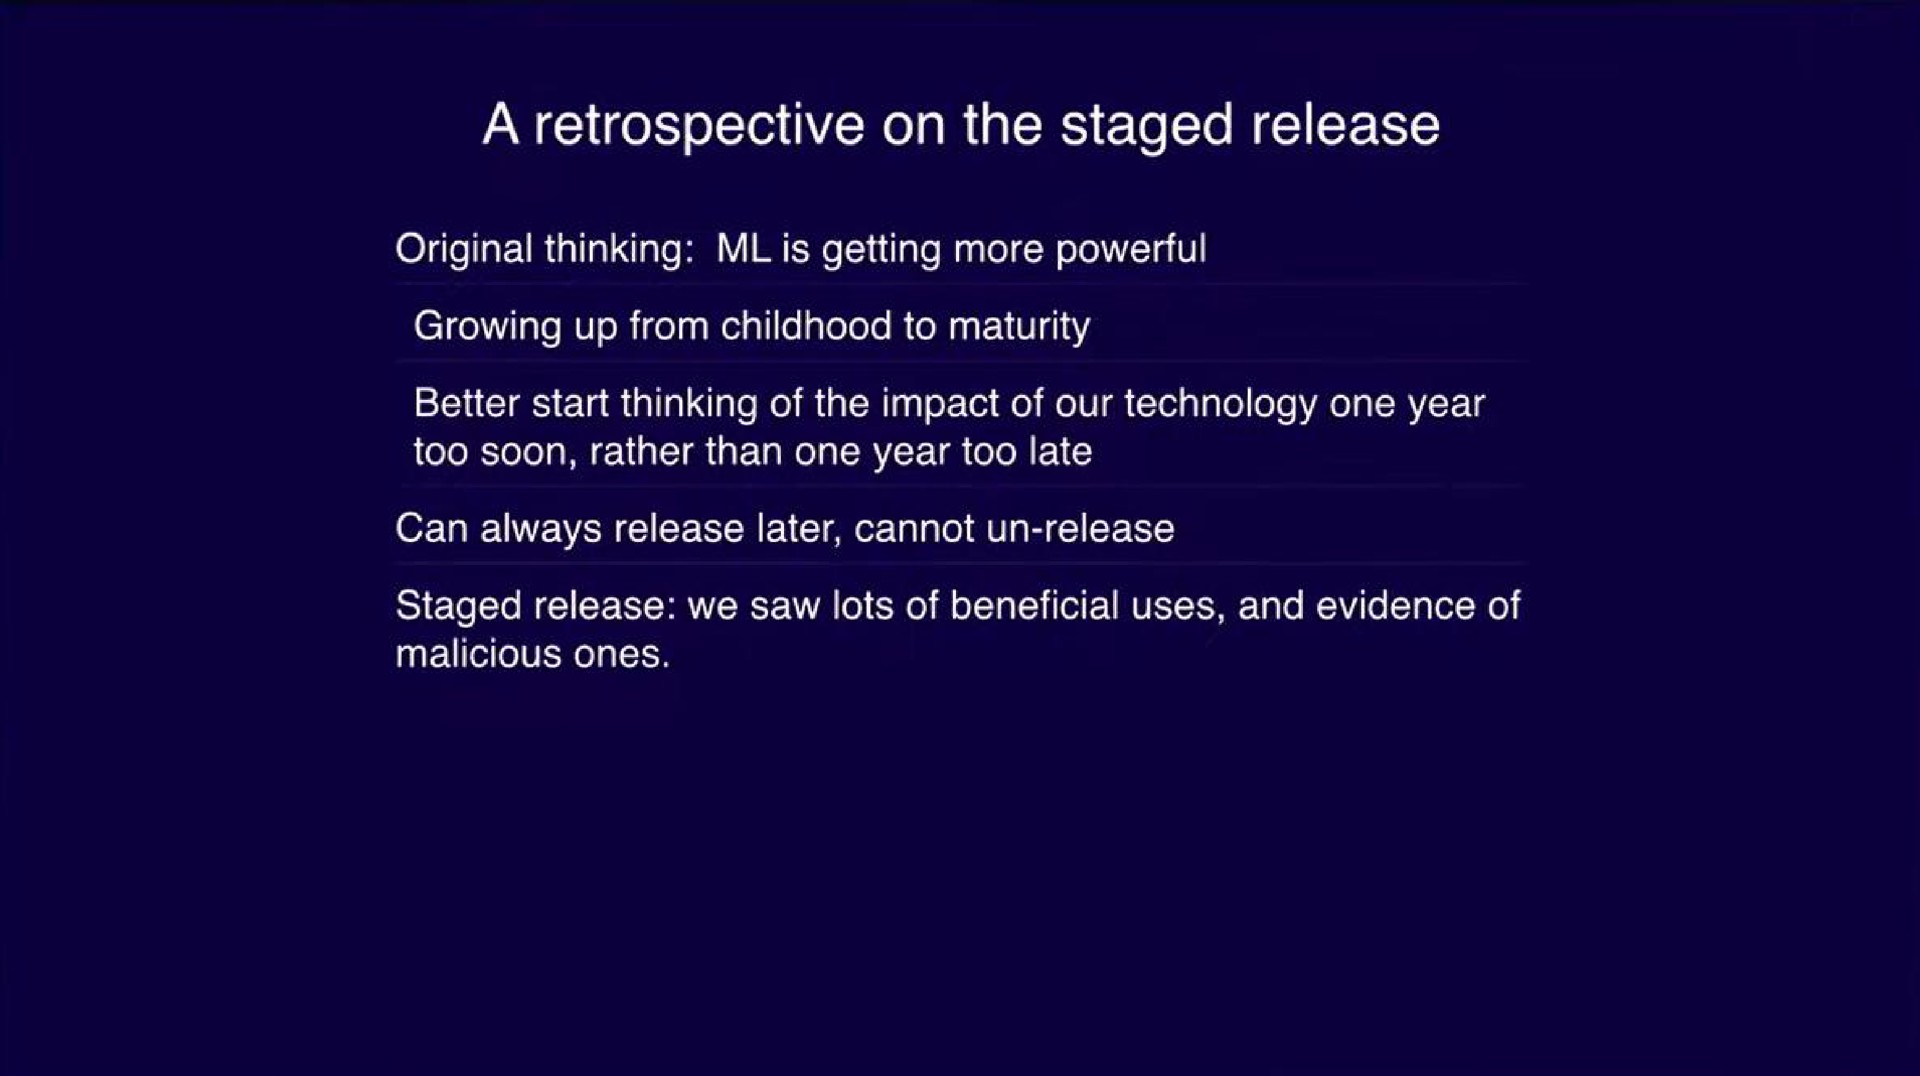 a retrospective on the staged release original thinking is getting more powerful growing up from childhood to maturity better start thinking of the impact of our technology one year too soon rather than one year too late can always release later cannot release staged release we saw lots of beneficial uses and evidence of malicious ones | OpenAI